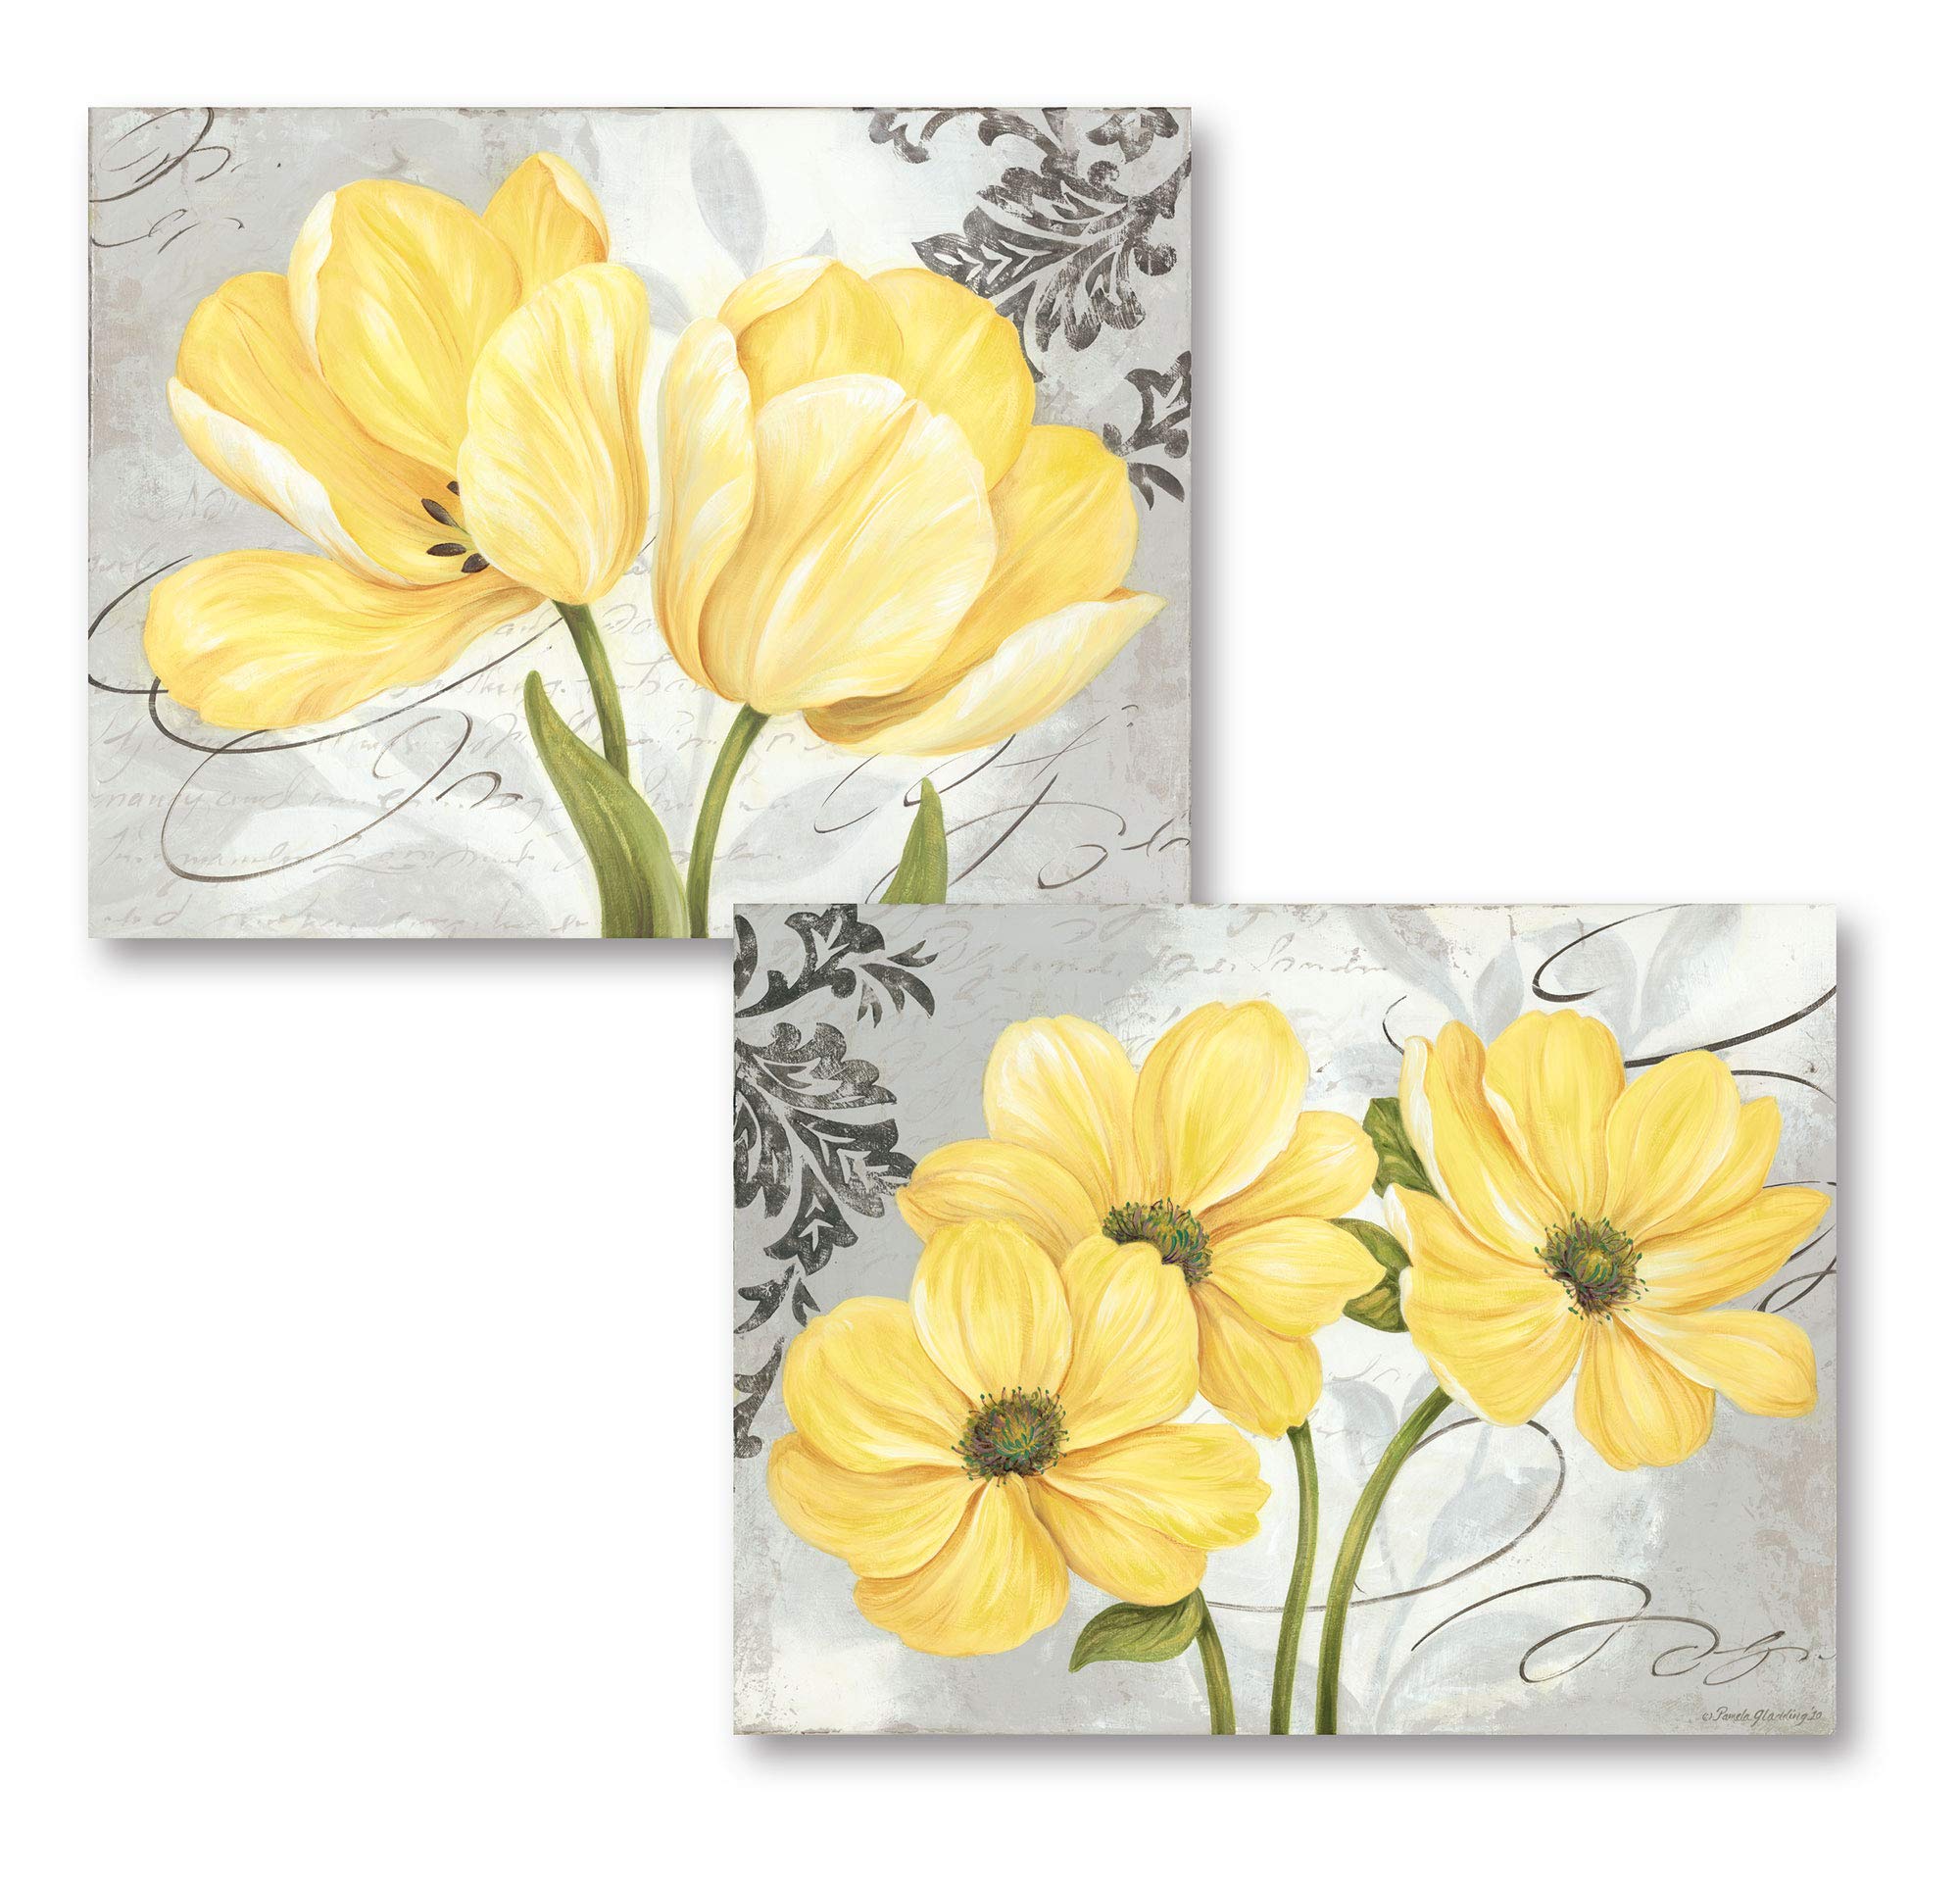 Book Cover Beautiful Grey & Yellow Blooming Flower Prints; Two 16x12 Unframed Paper Posters Two 16 x 12 in Poster Prints